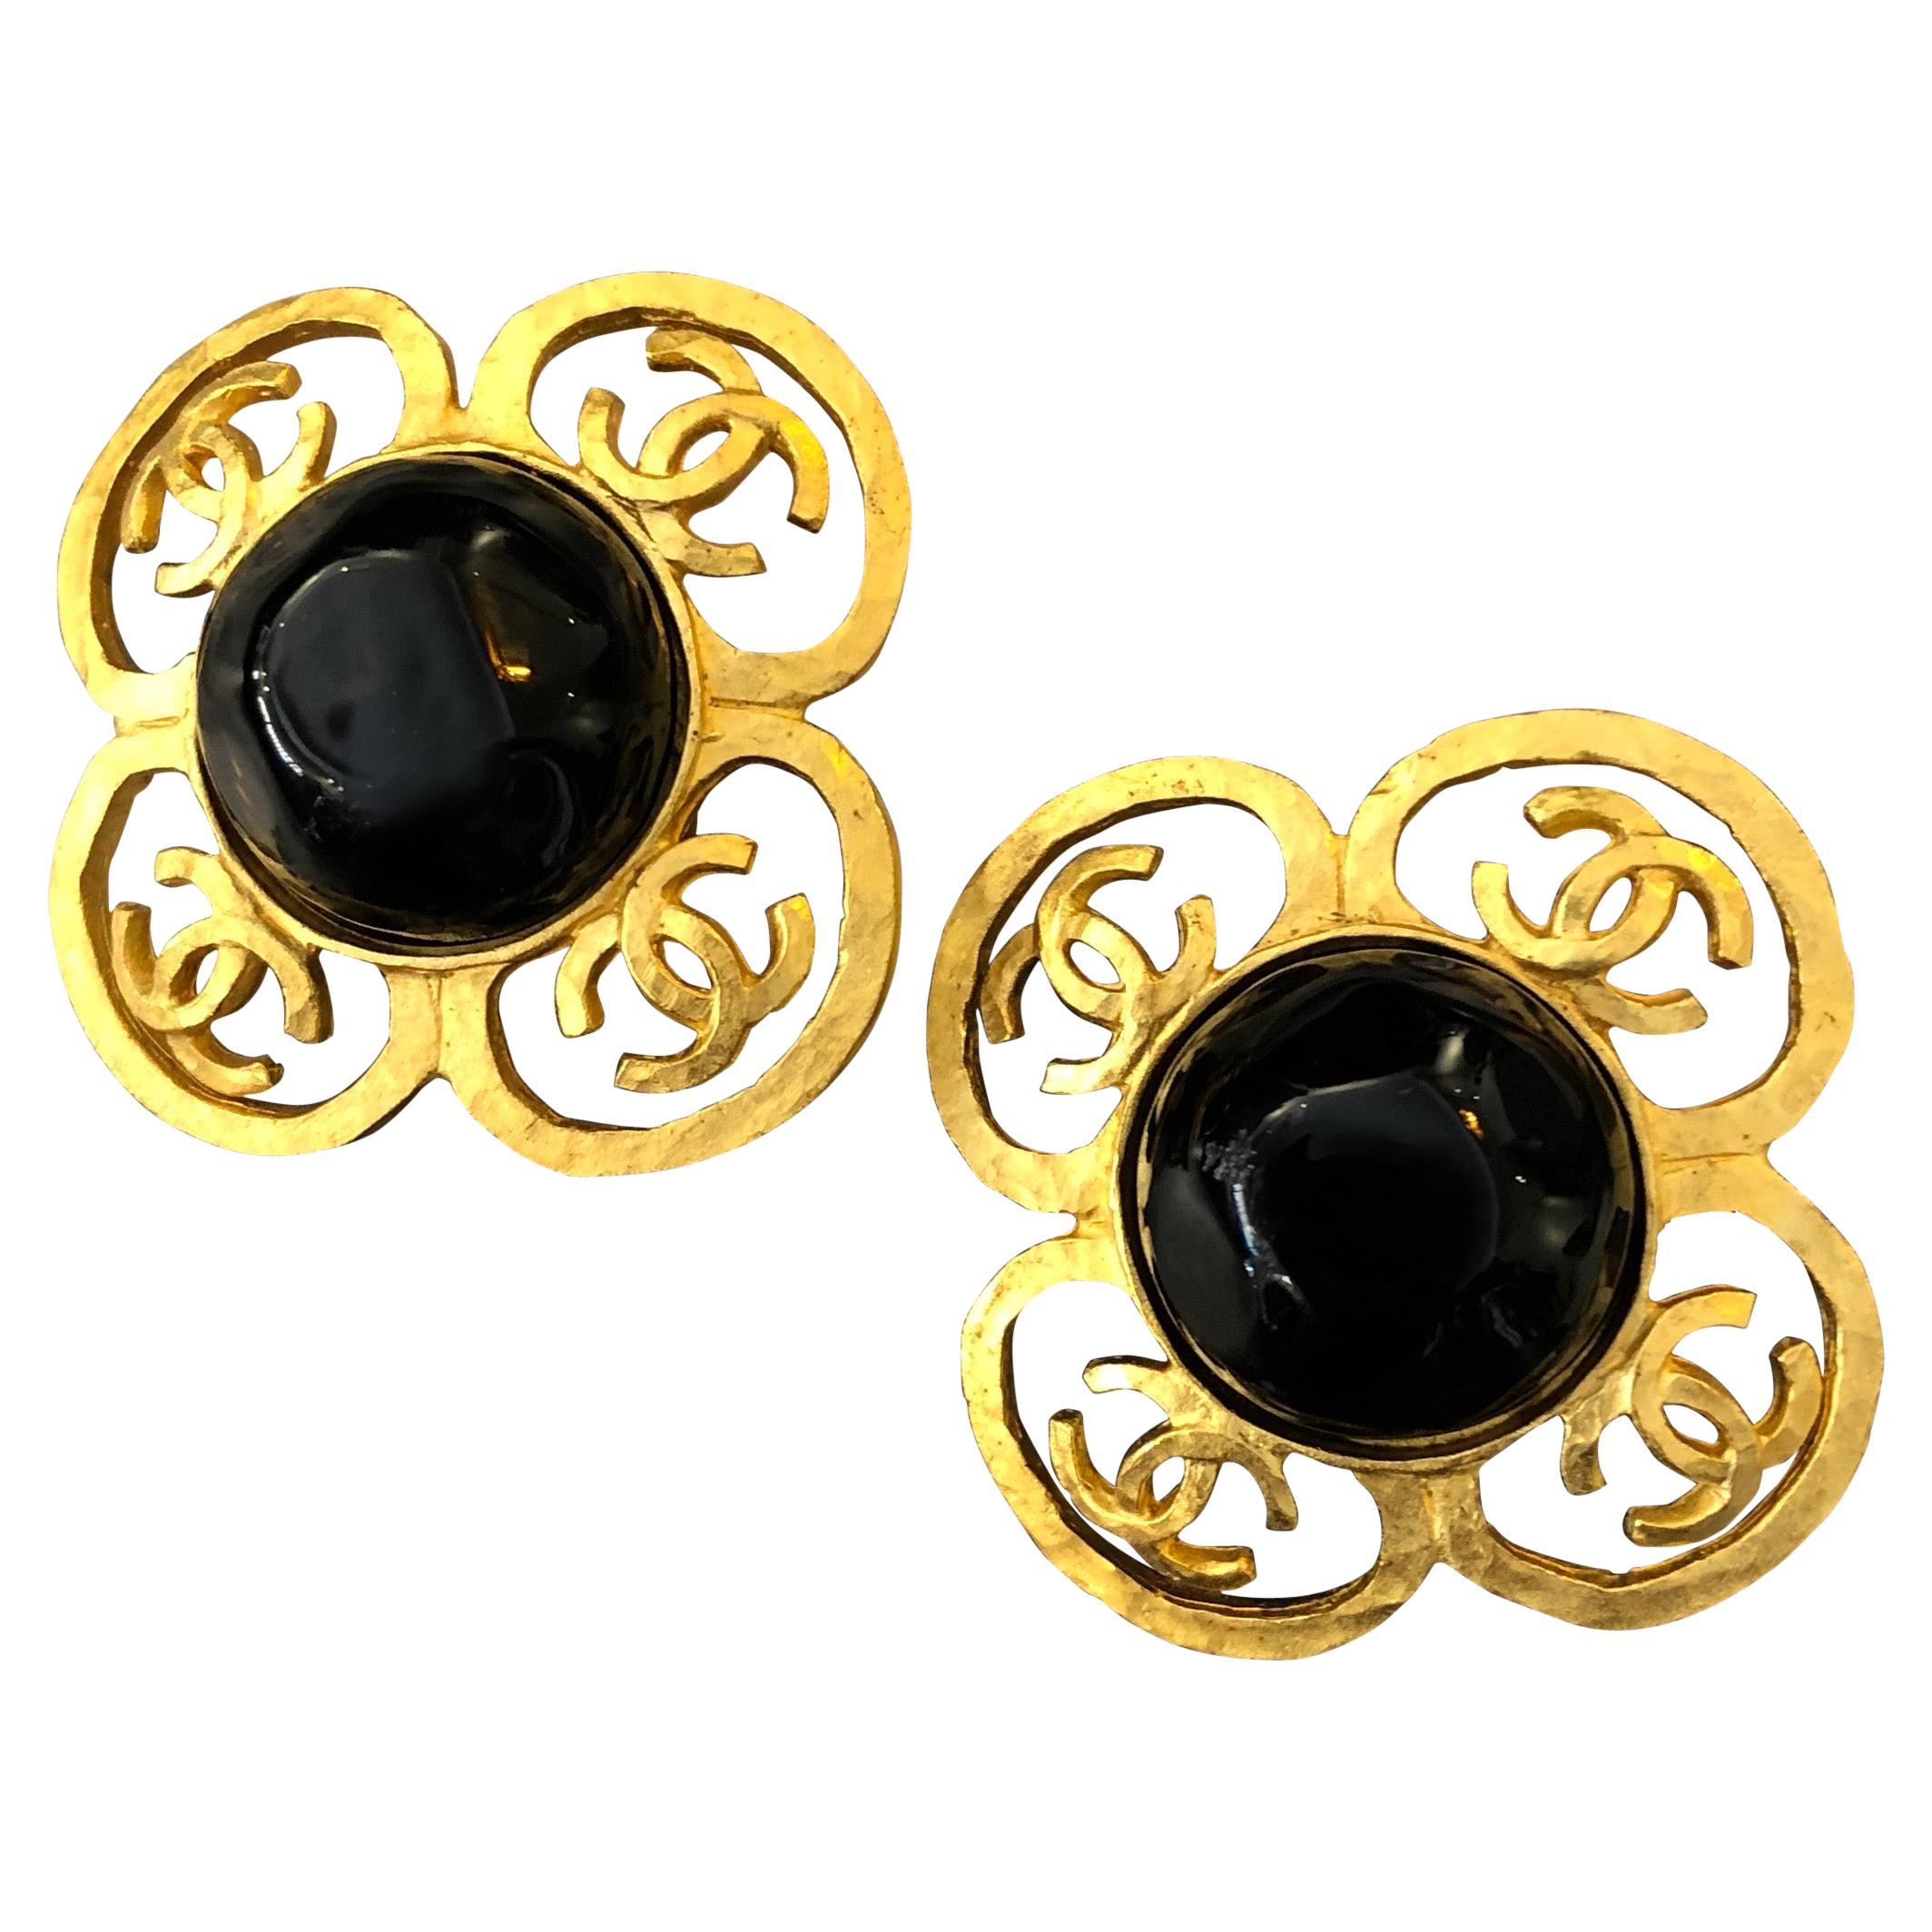 1995 Vintage CHANEL Black Gripoix Gold Toned CC Clover Earclips Clip On Earrings